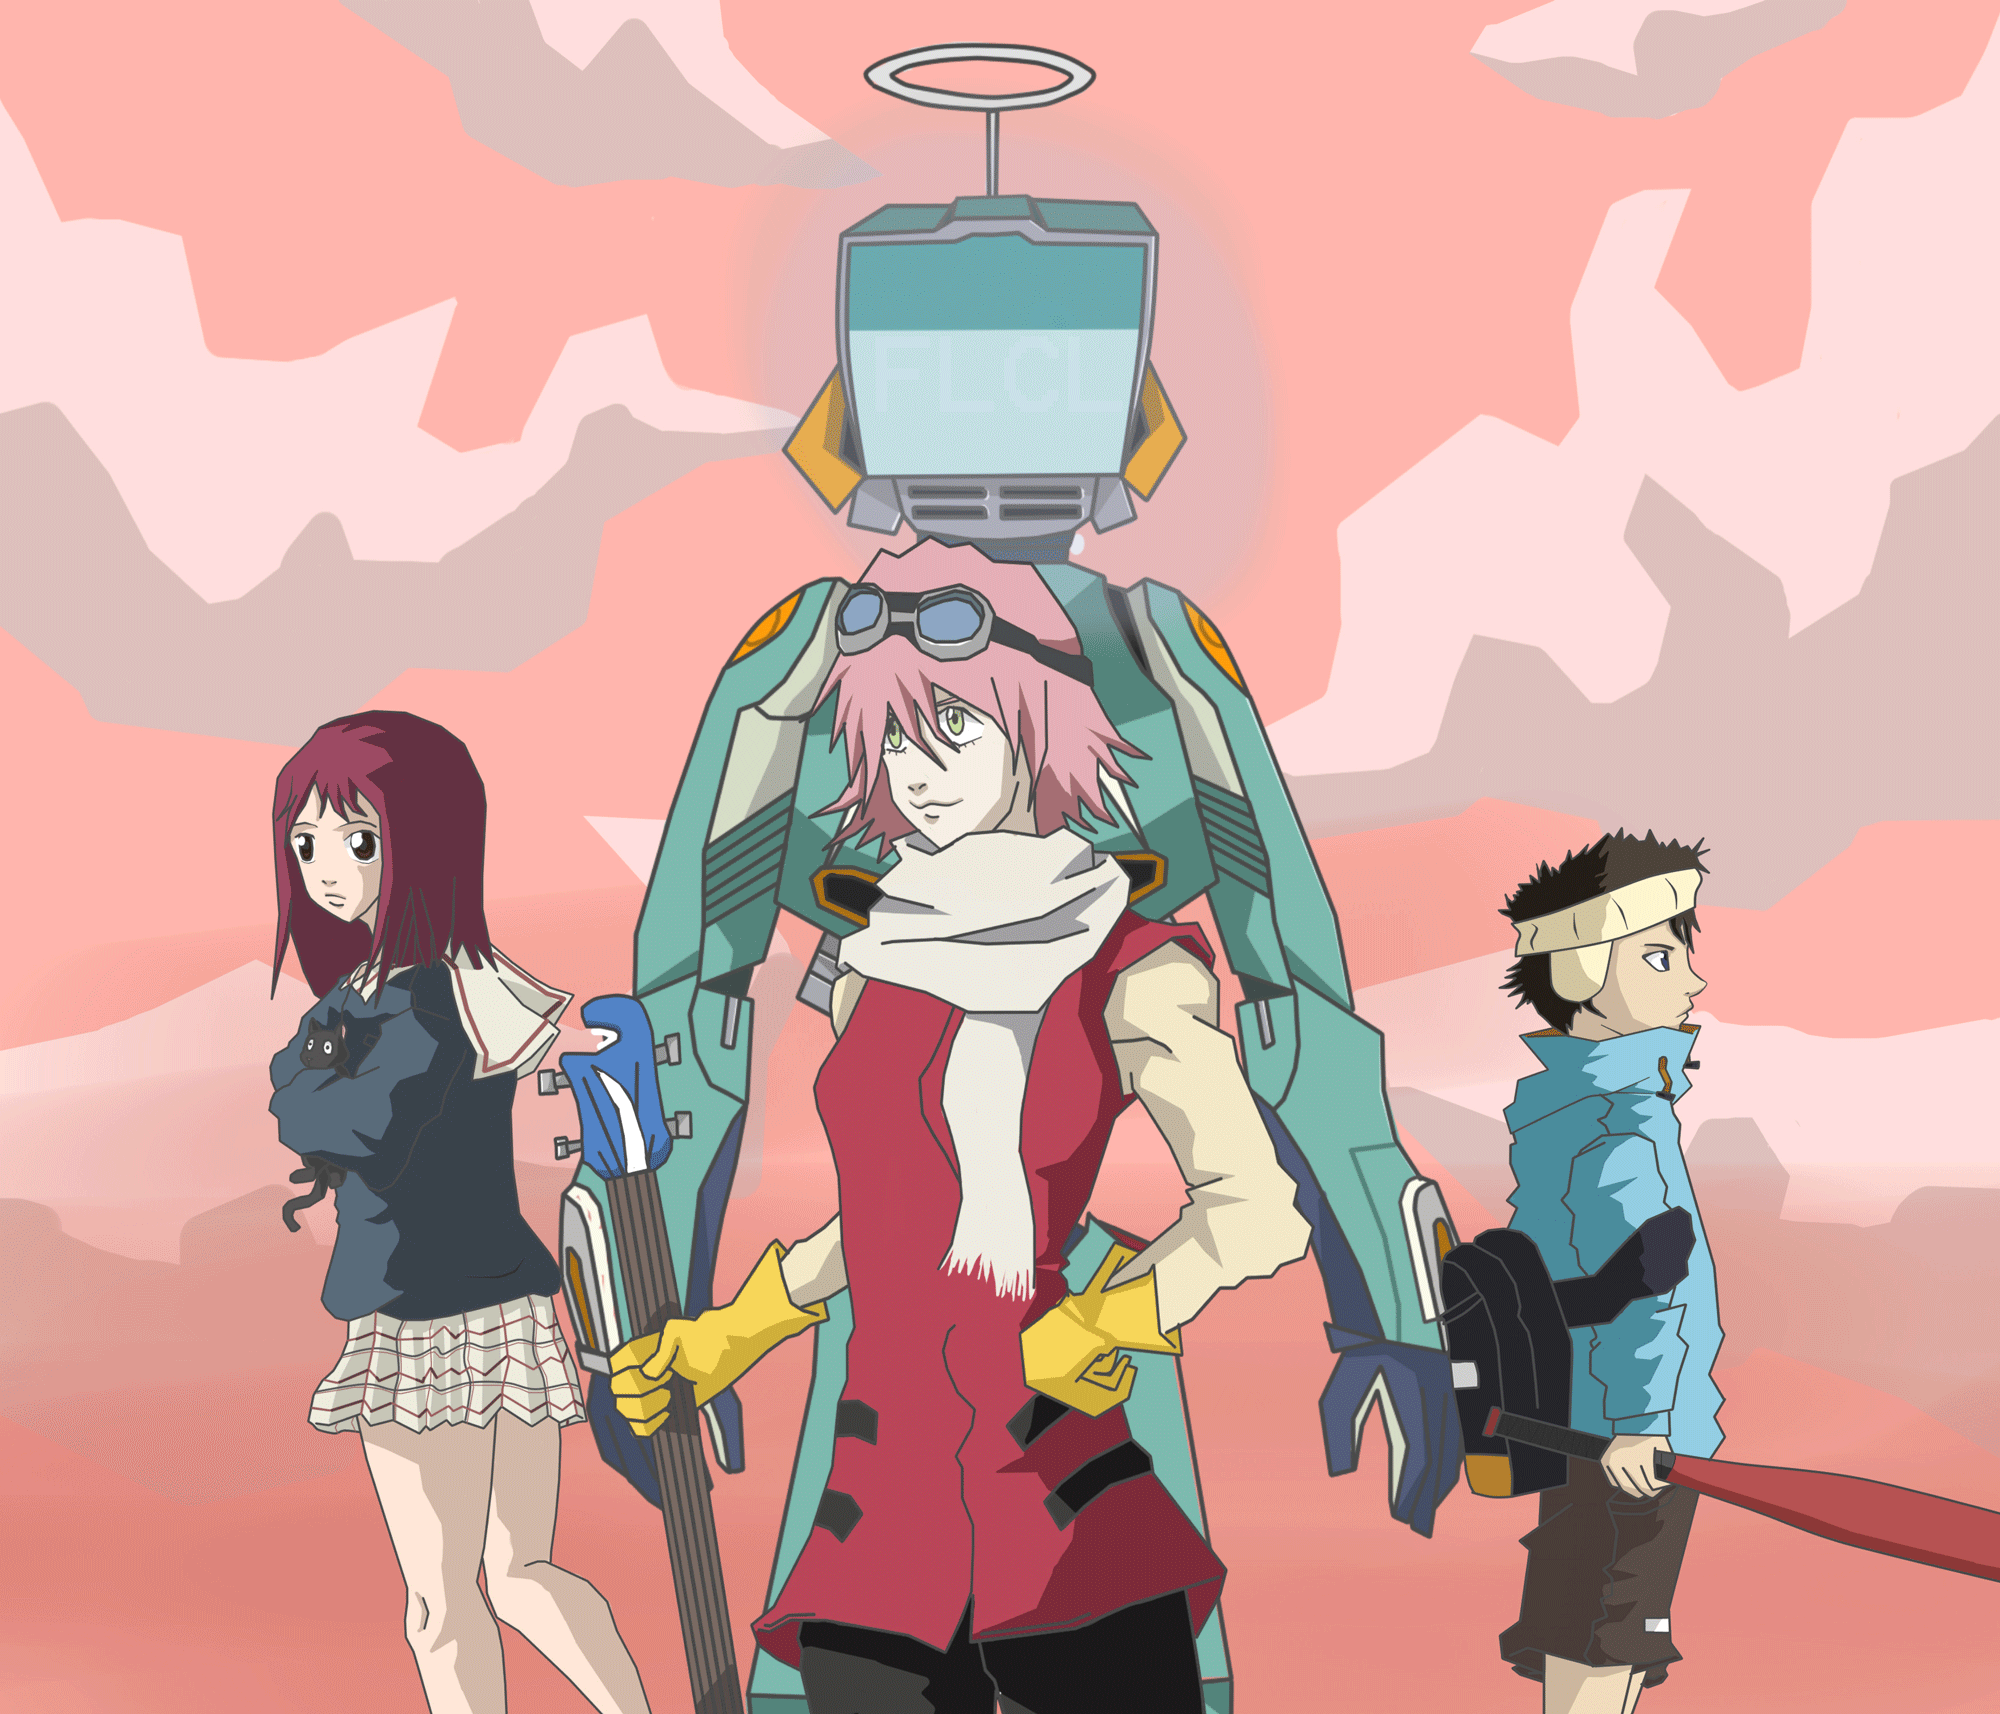 Фури кури. FLCL (Fooly Cooly).